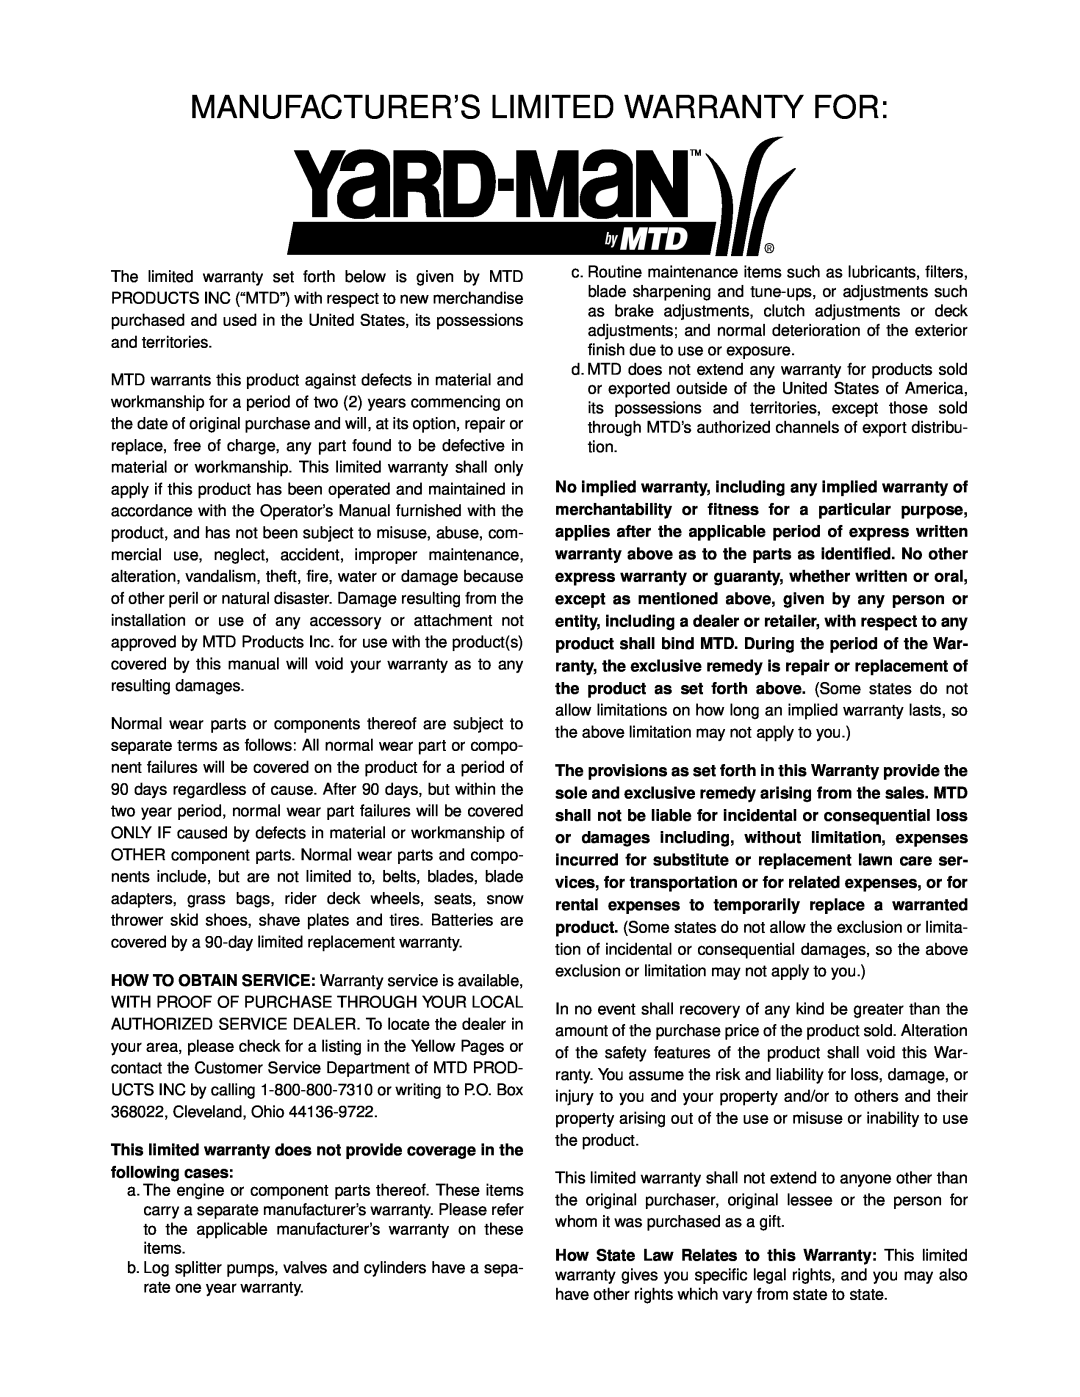 Yard-Man 53AA1A3G401 manual Manufacturer’S Limited Warranty For 